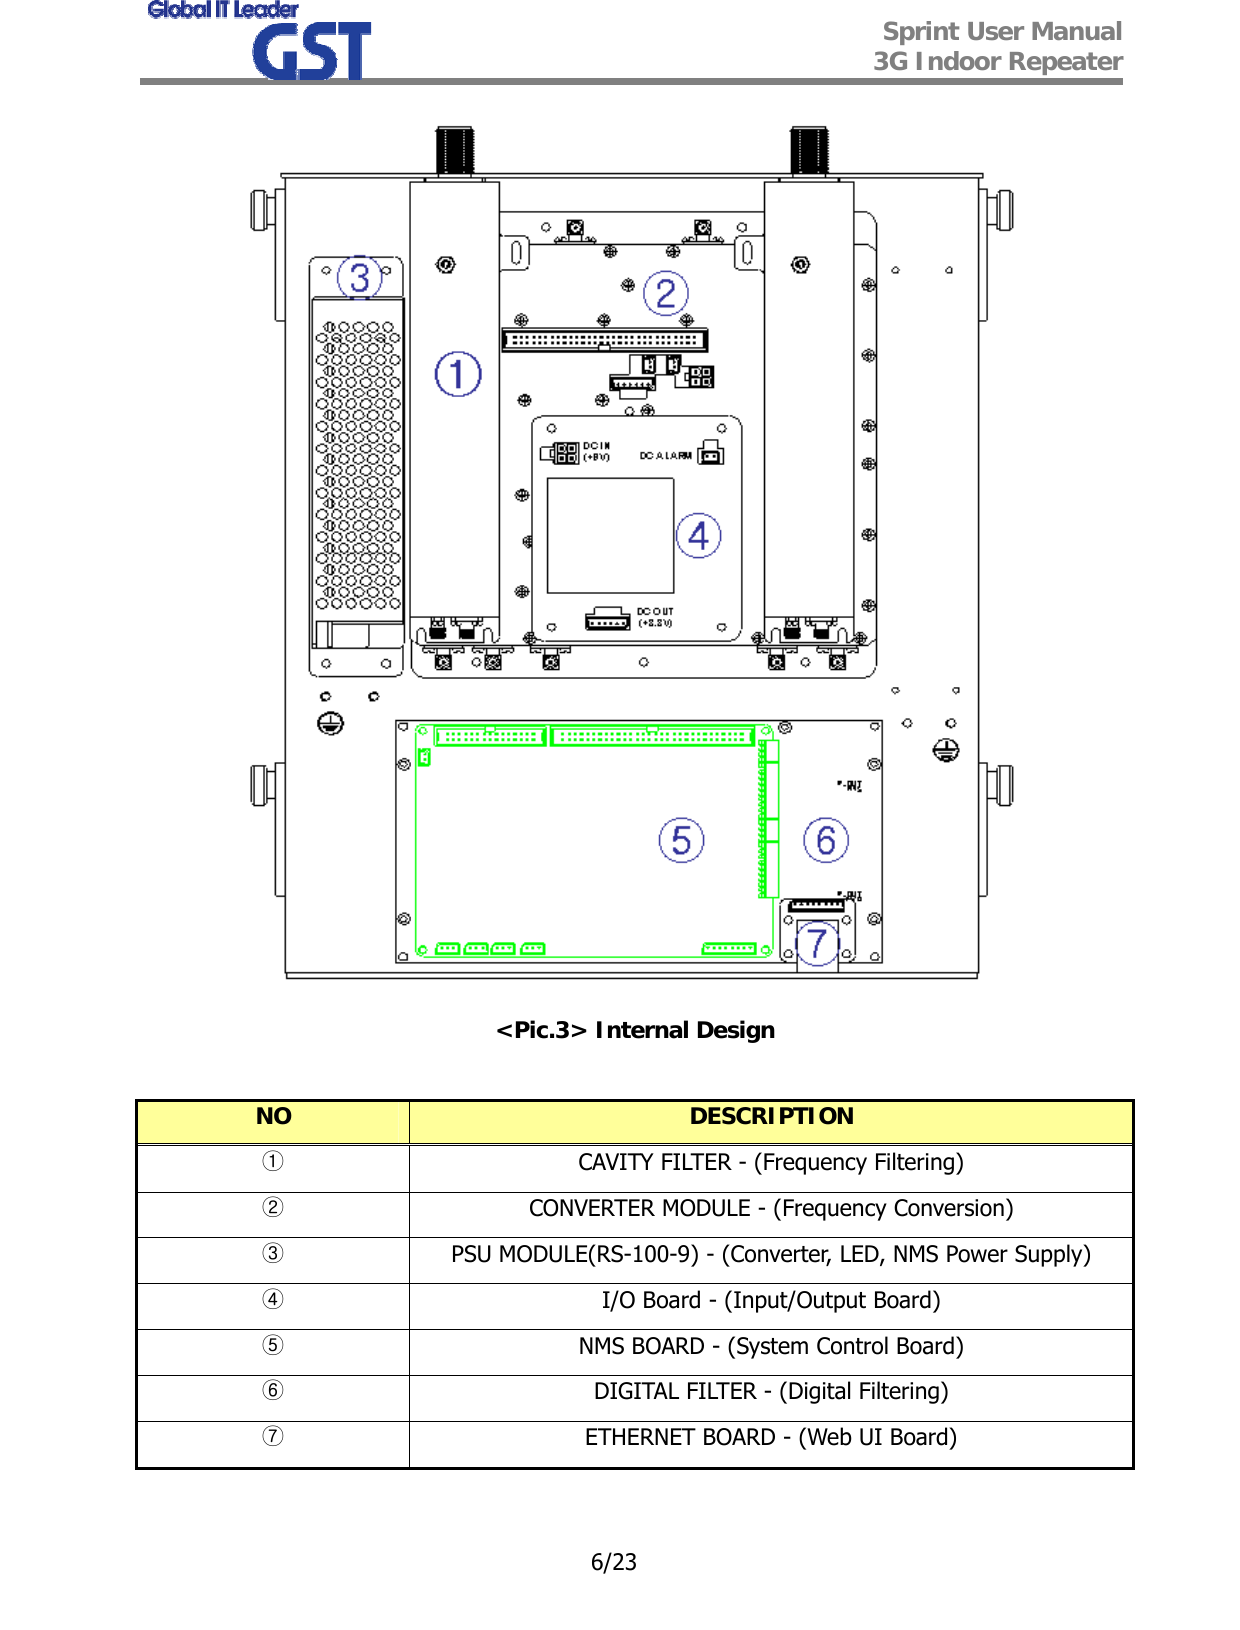  Sprint User Manual 3G Indoor Repeater   6/23  &lt;Pic.3&gt; Internal Design  NO  DESCRIPTION ① CAVITY FILTER - (Frequency Filtering) ② CONVERTER MODULE - (Frequency Conversion) ③ PSU MODULE(RS-100-9) - (Converter, LED, NMS Power Supply) ④ I/O Board - (Input/Output Board) ⑤ NMS BOARD - (System Control Board) ⑥ DIGITAL FILTER - (Digital Filtering) ⑦ ETHERNET BOARD - (Web UI Board)  